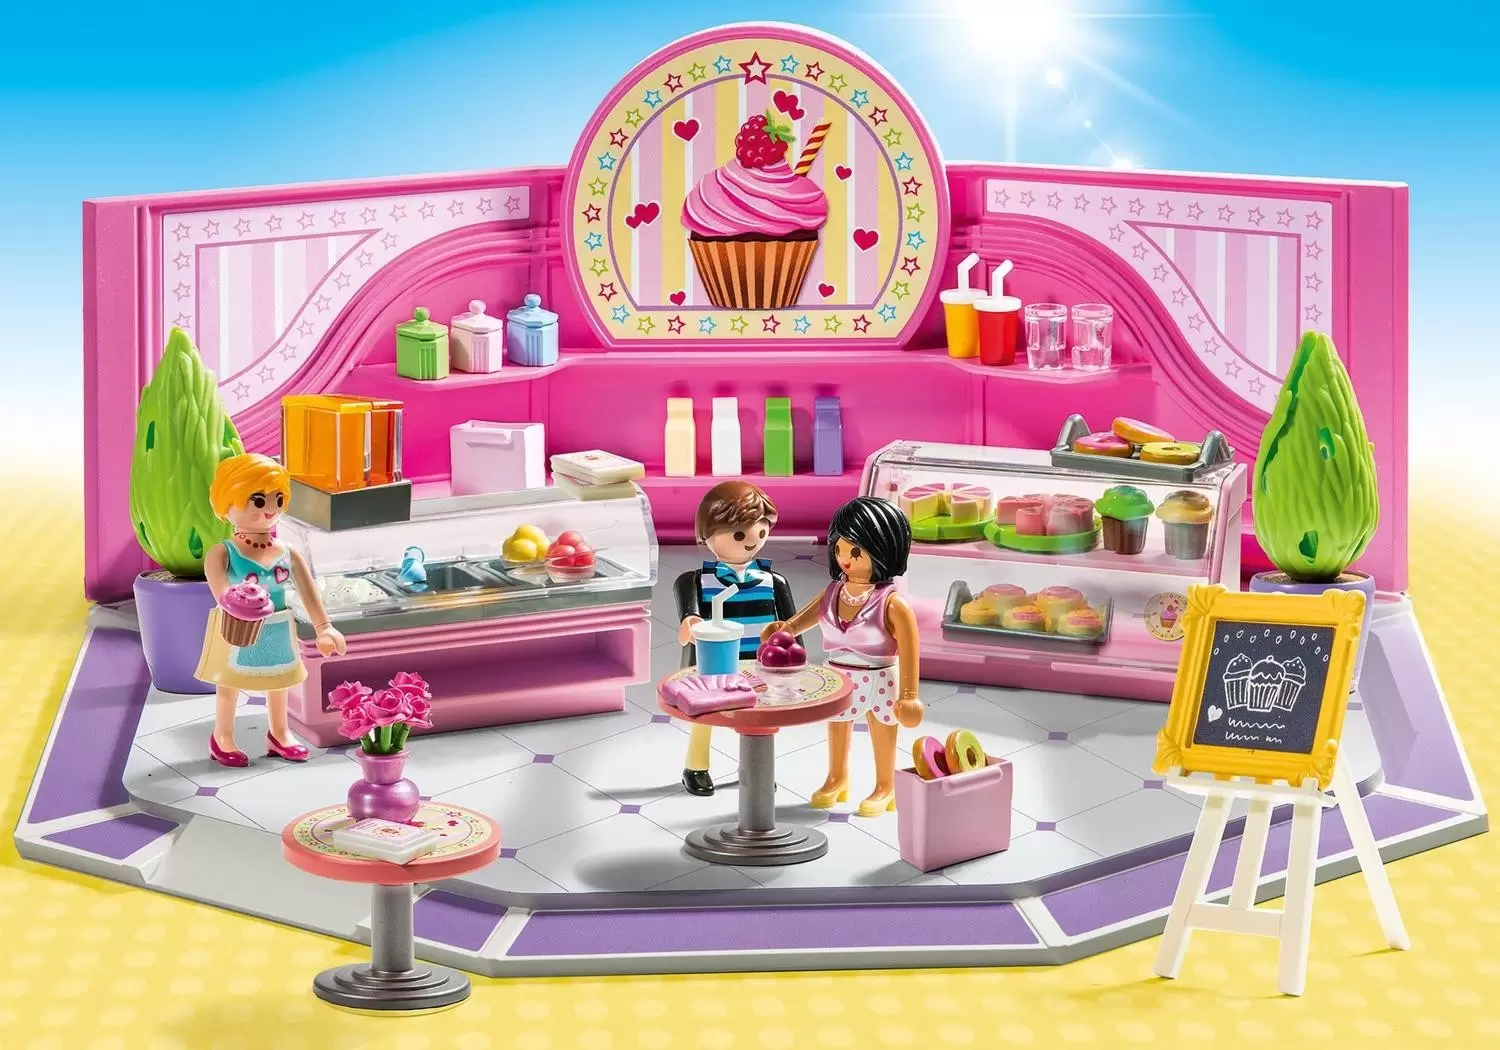 Playmobil in the City - Cupcake Shop